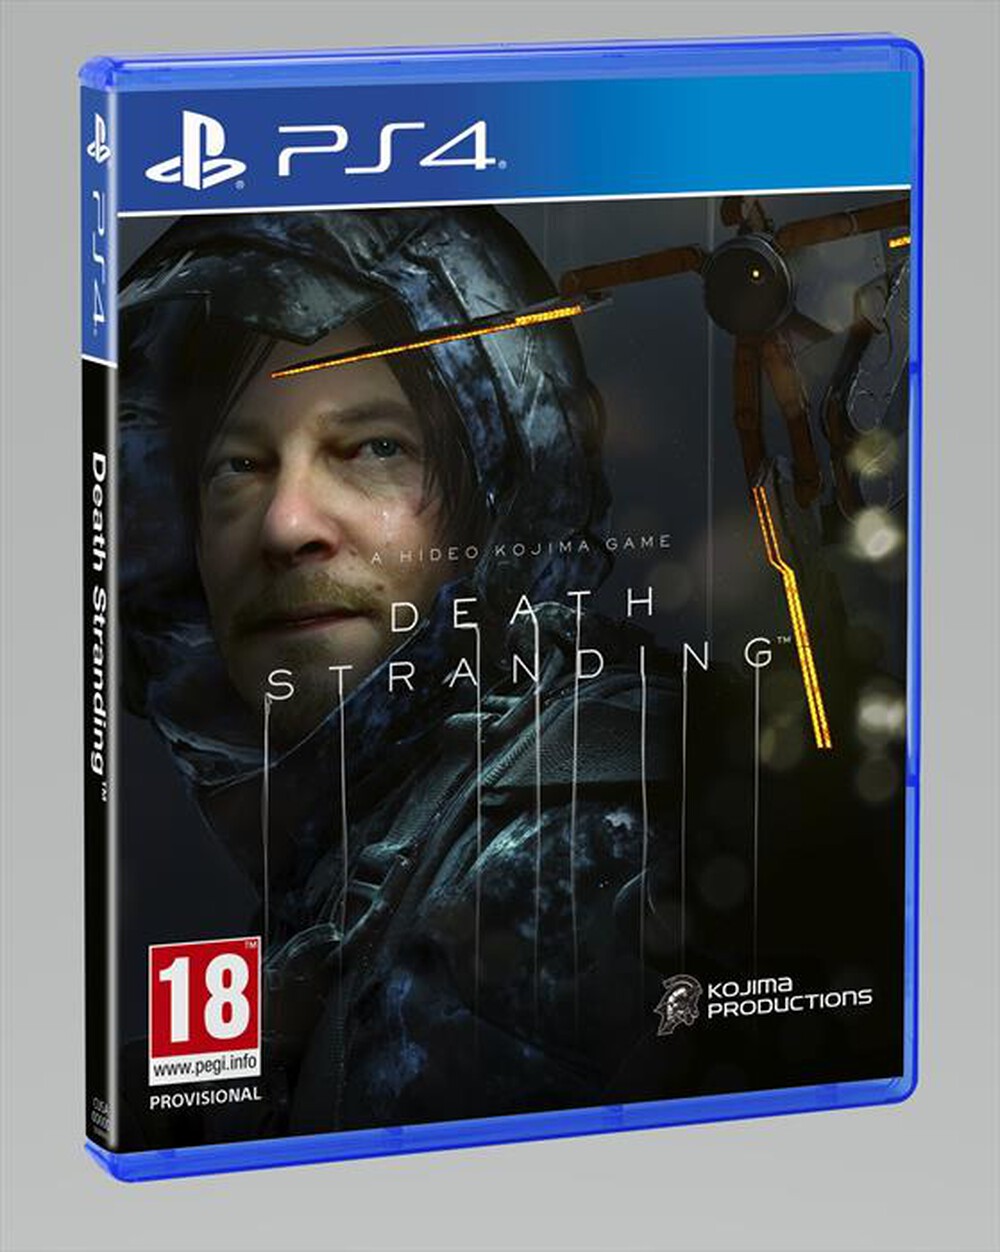 "SONY COMPUTER - DEATH STRANDING PS4"